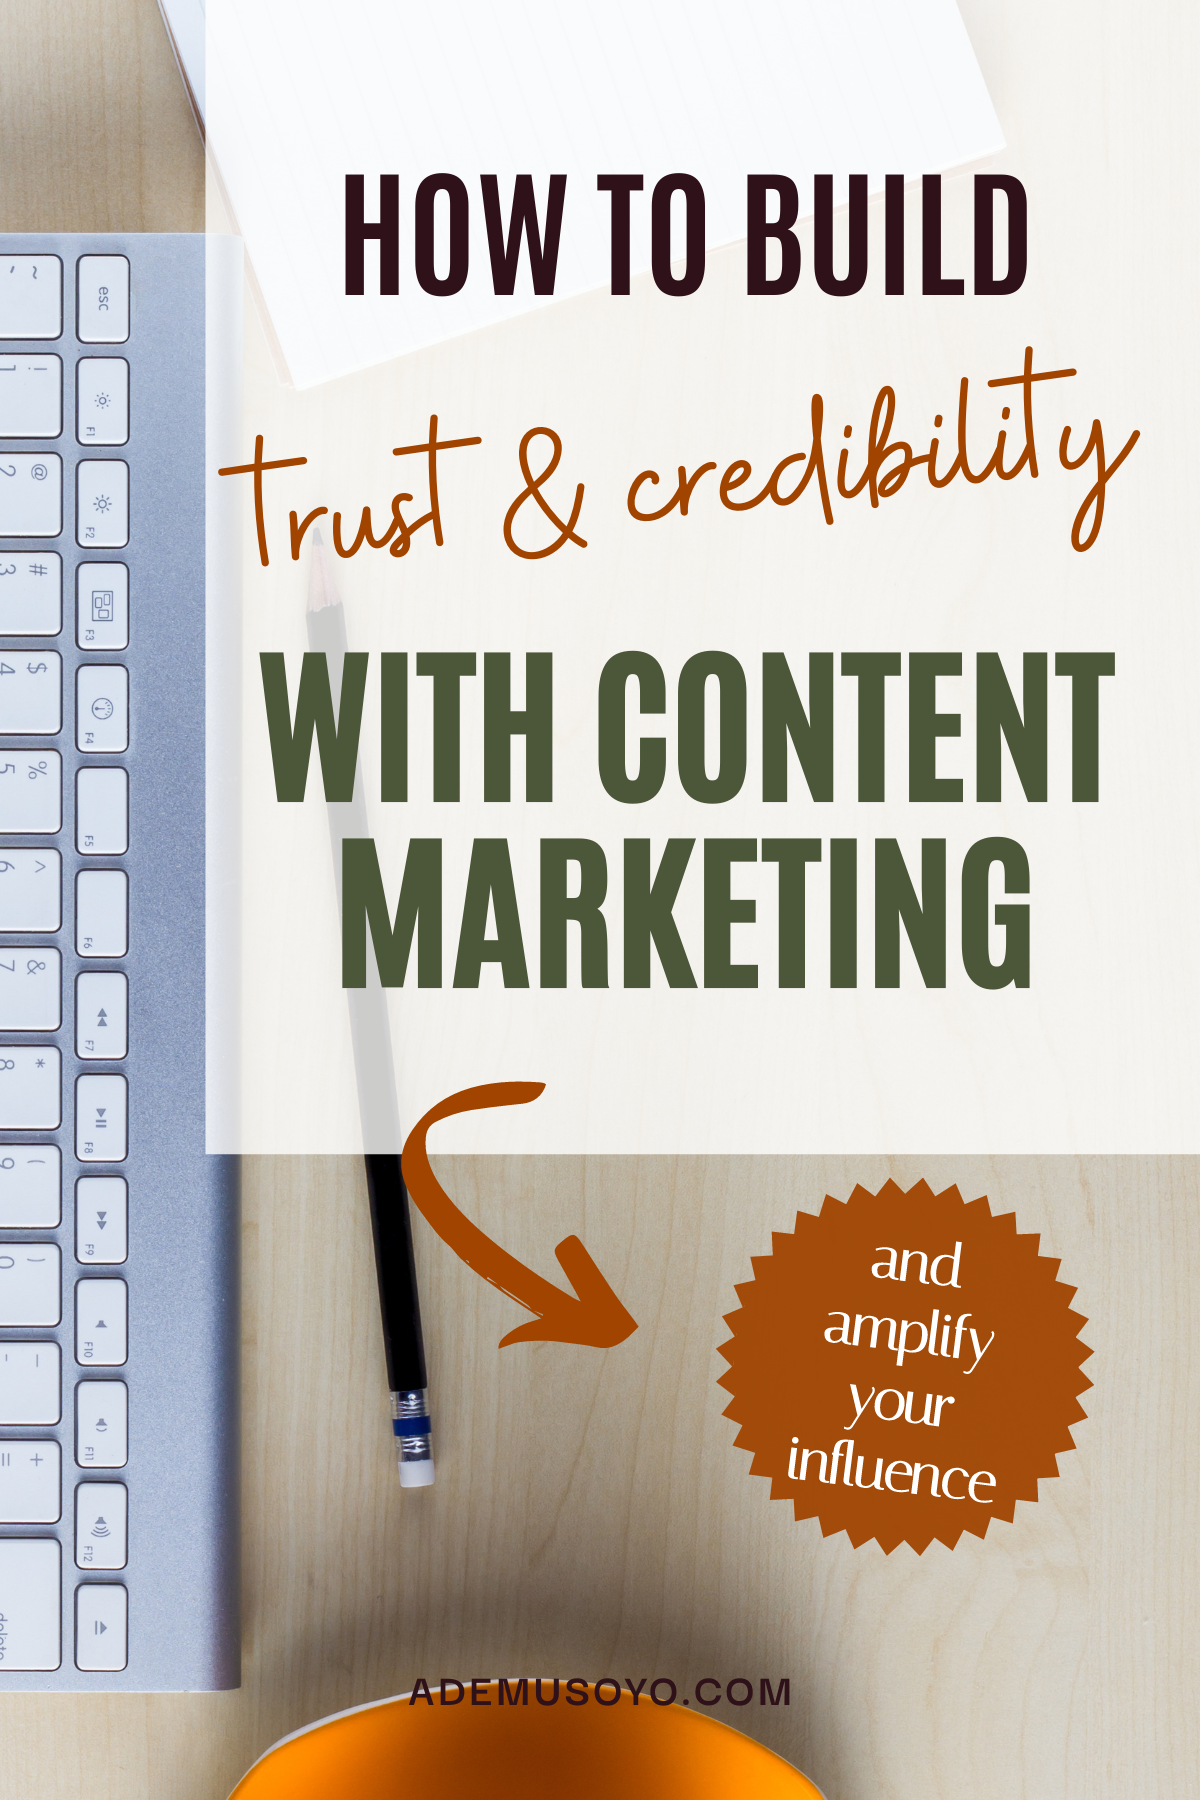 How to Build Trust With Content Marketing - 5 Proven Strategies, building trust through content marketing, content marketing strategy tips, trust building content